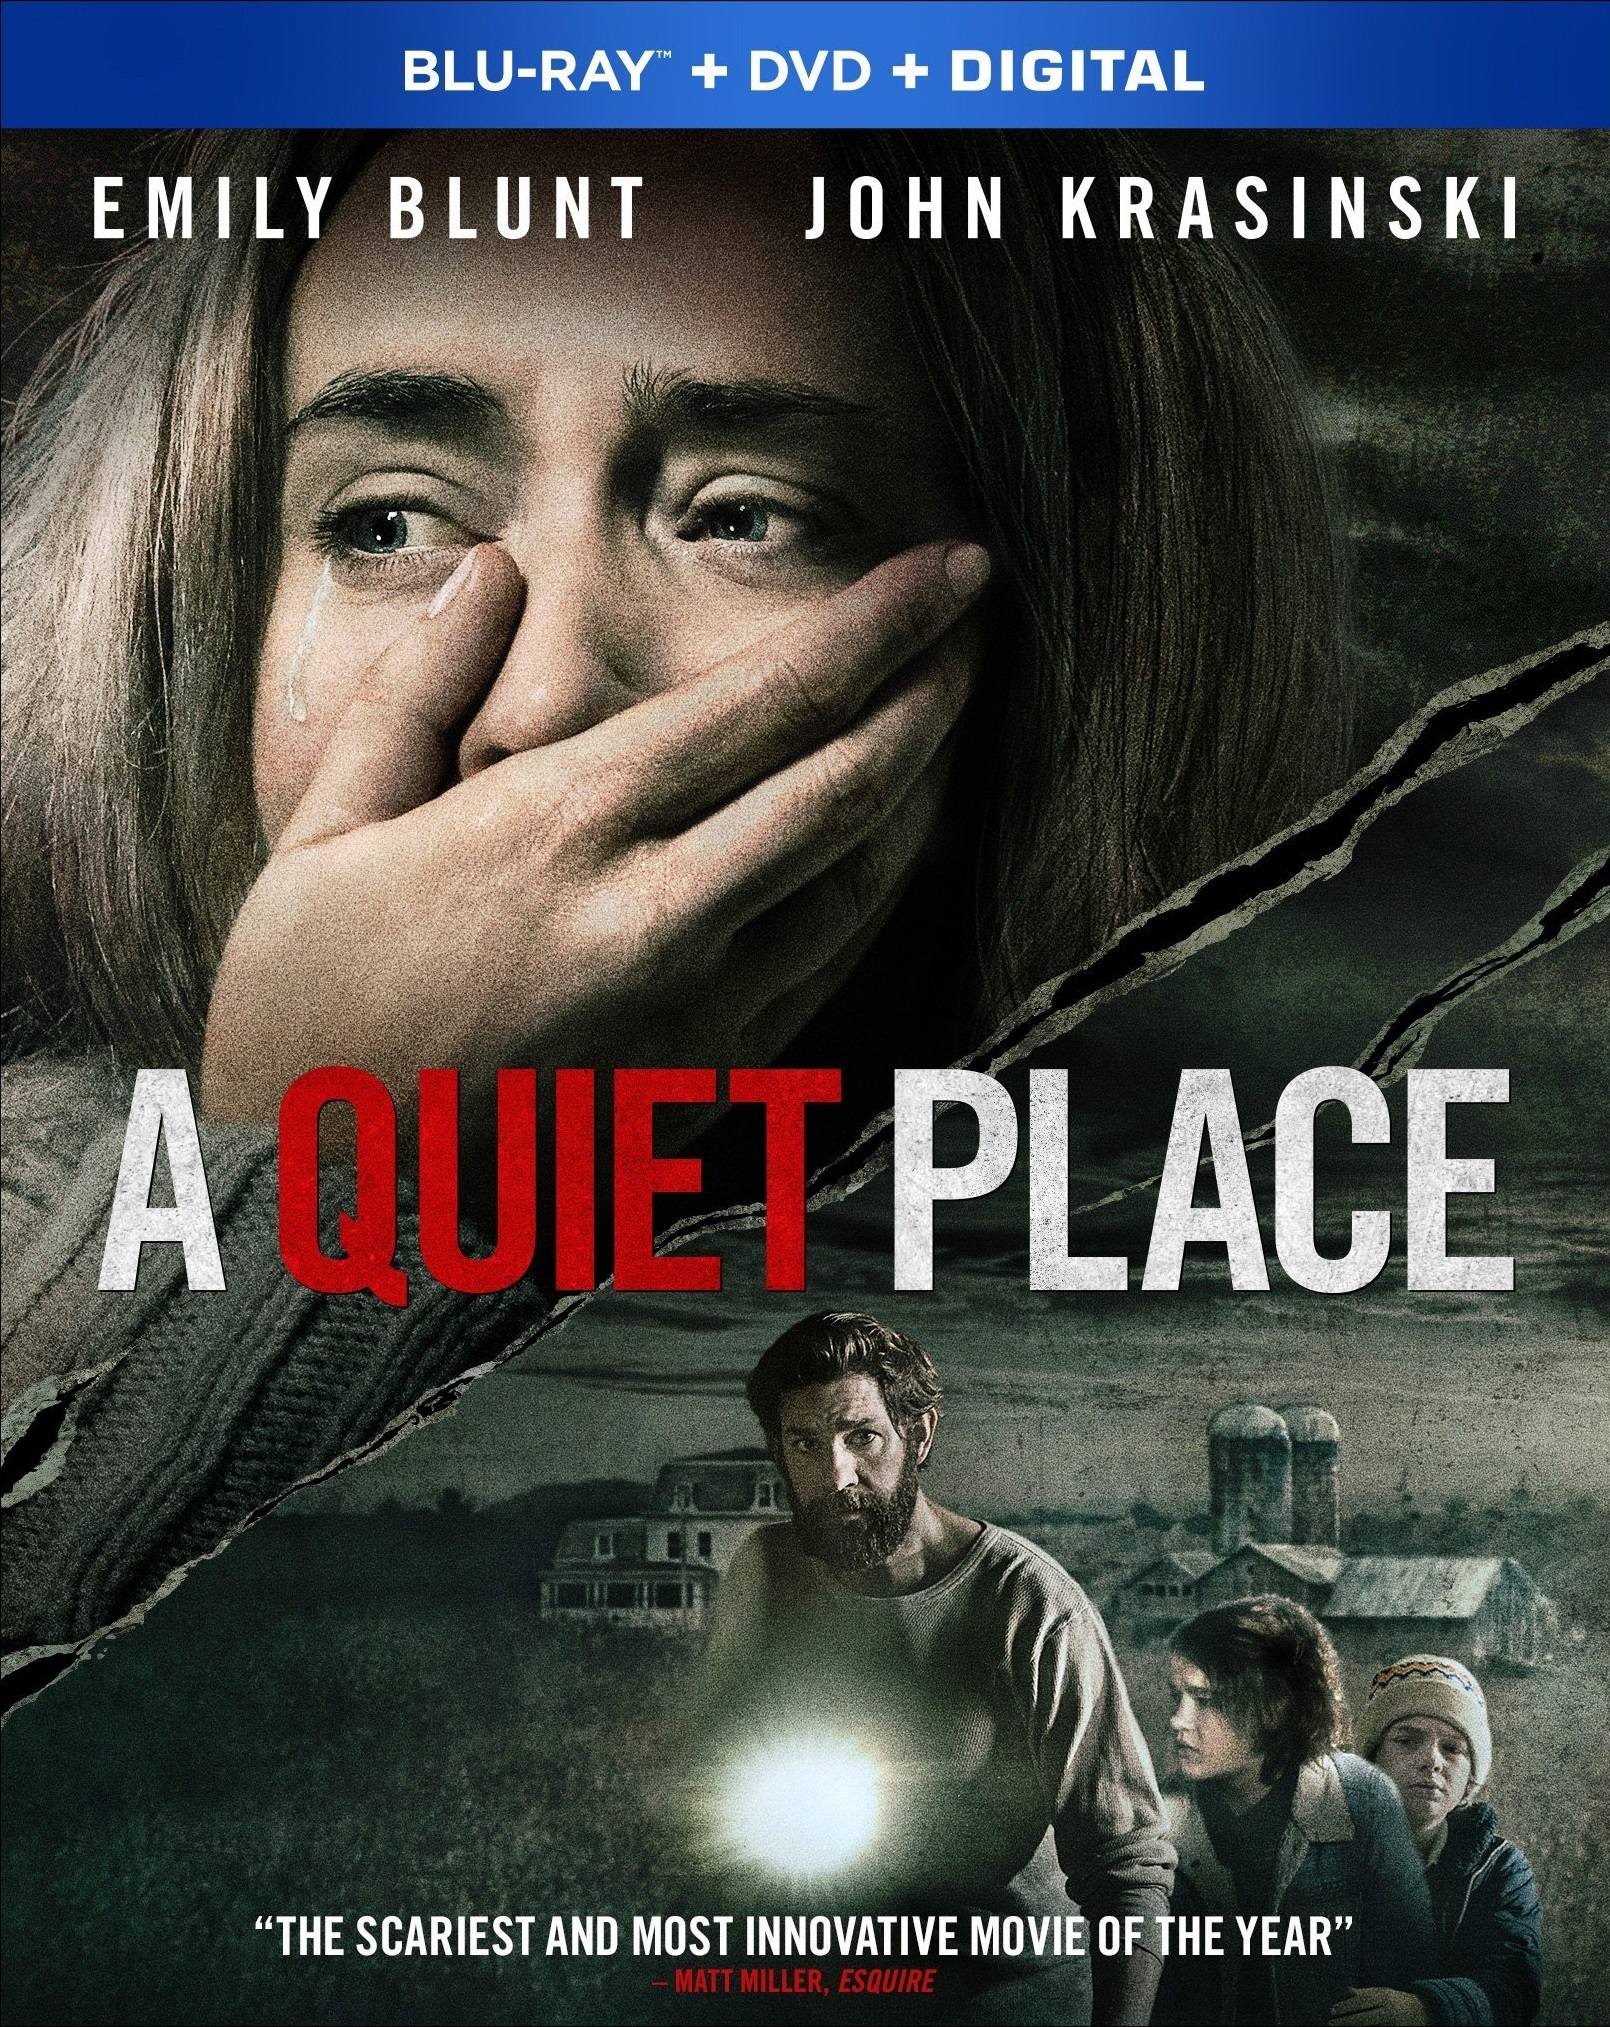 A Quiet Place (2018) Un Lugar Tranquilo (2018) [AC3 5.1 + SUP] [Blu Ray-Rip] 202647_front